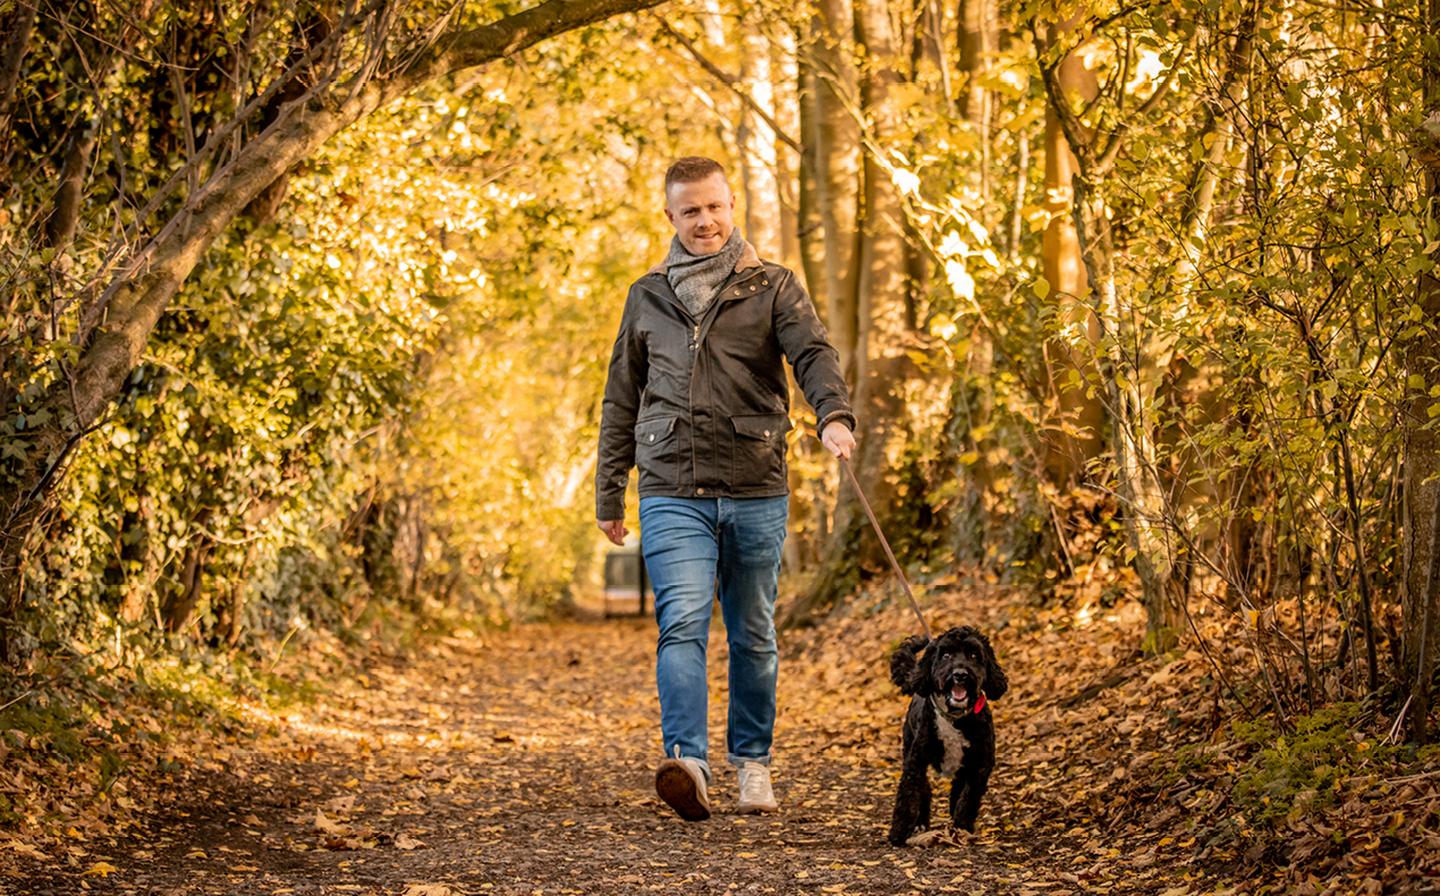 Lee, who works at FatFace HQ, taking his Cockapoo Balthy for a walk through the woods while wearing the Broadsands Jacket